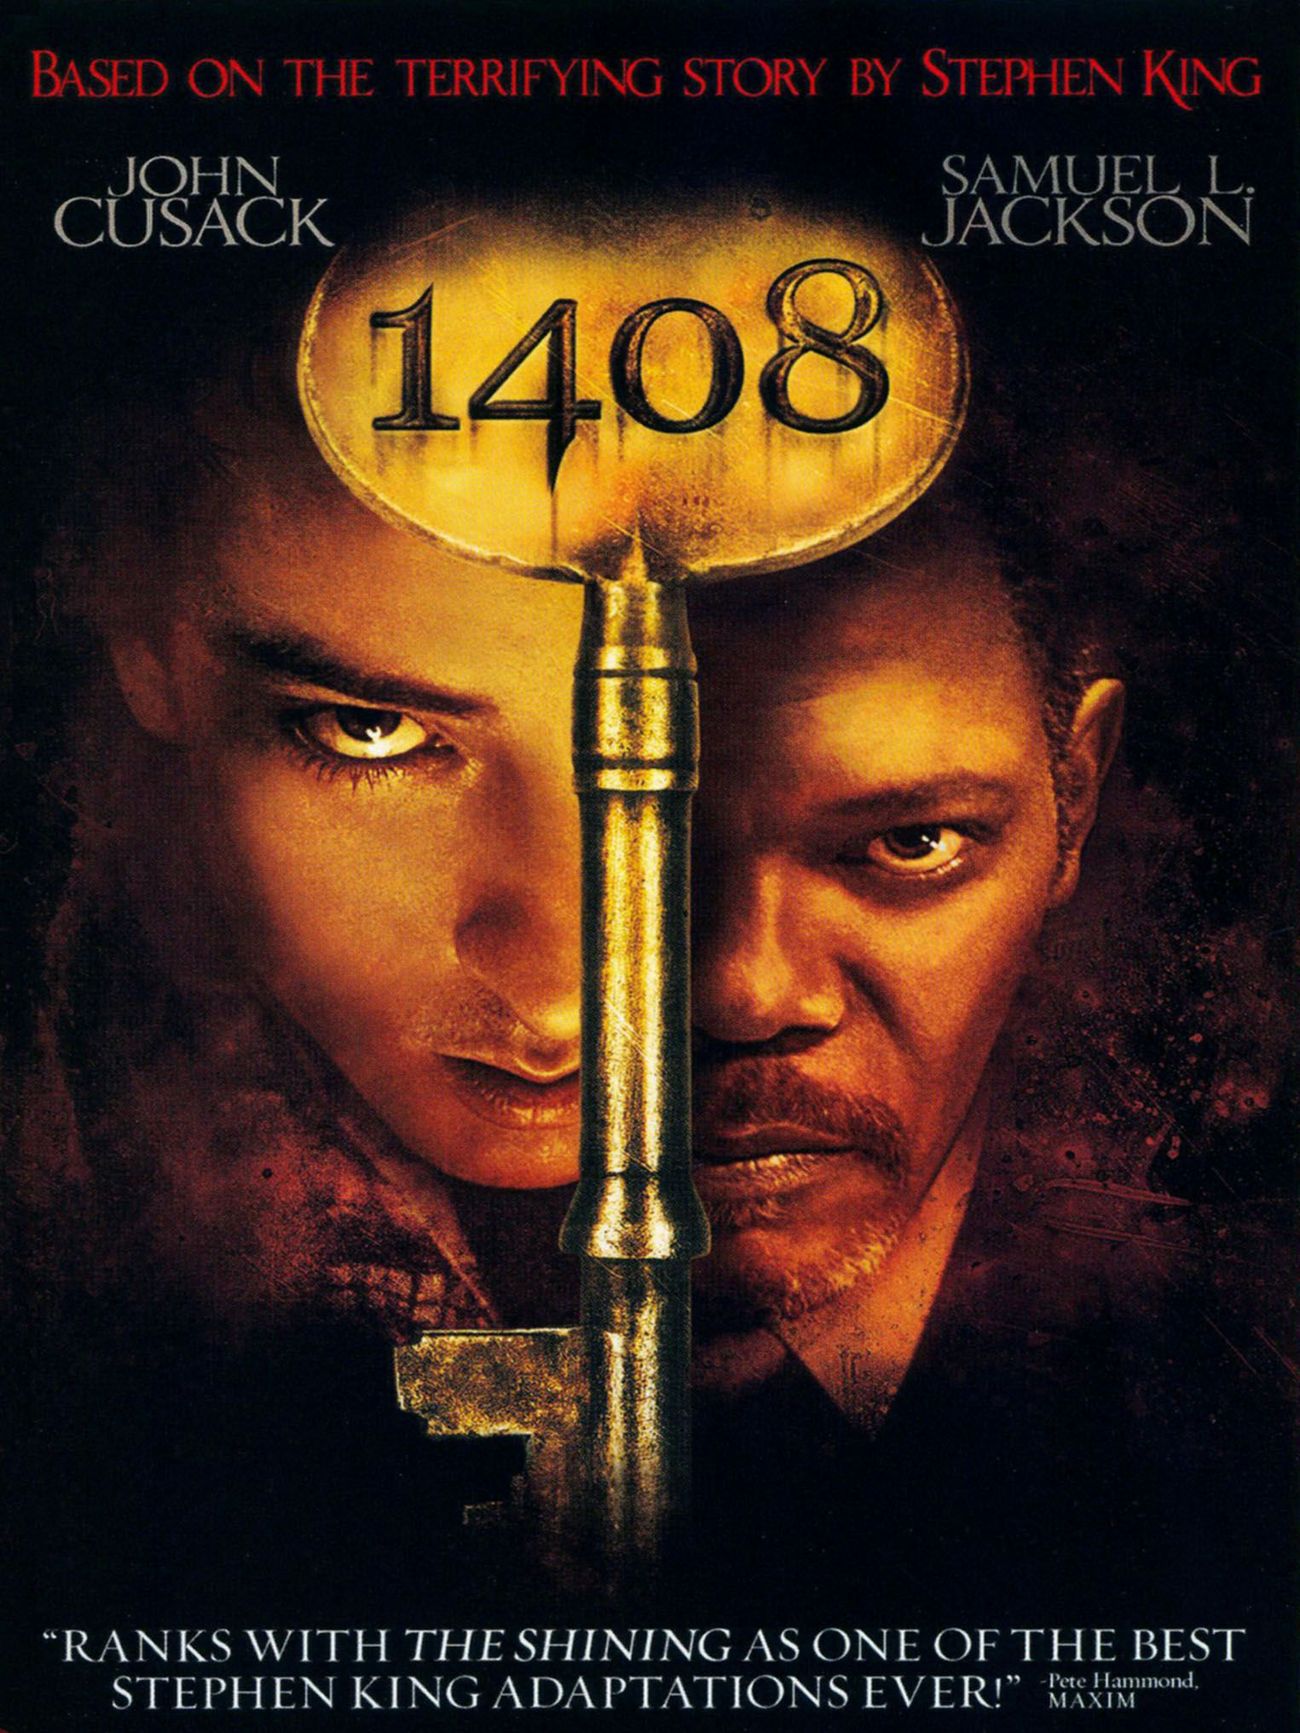 1408 by stephen king